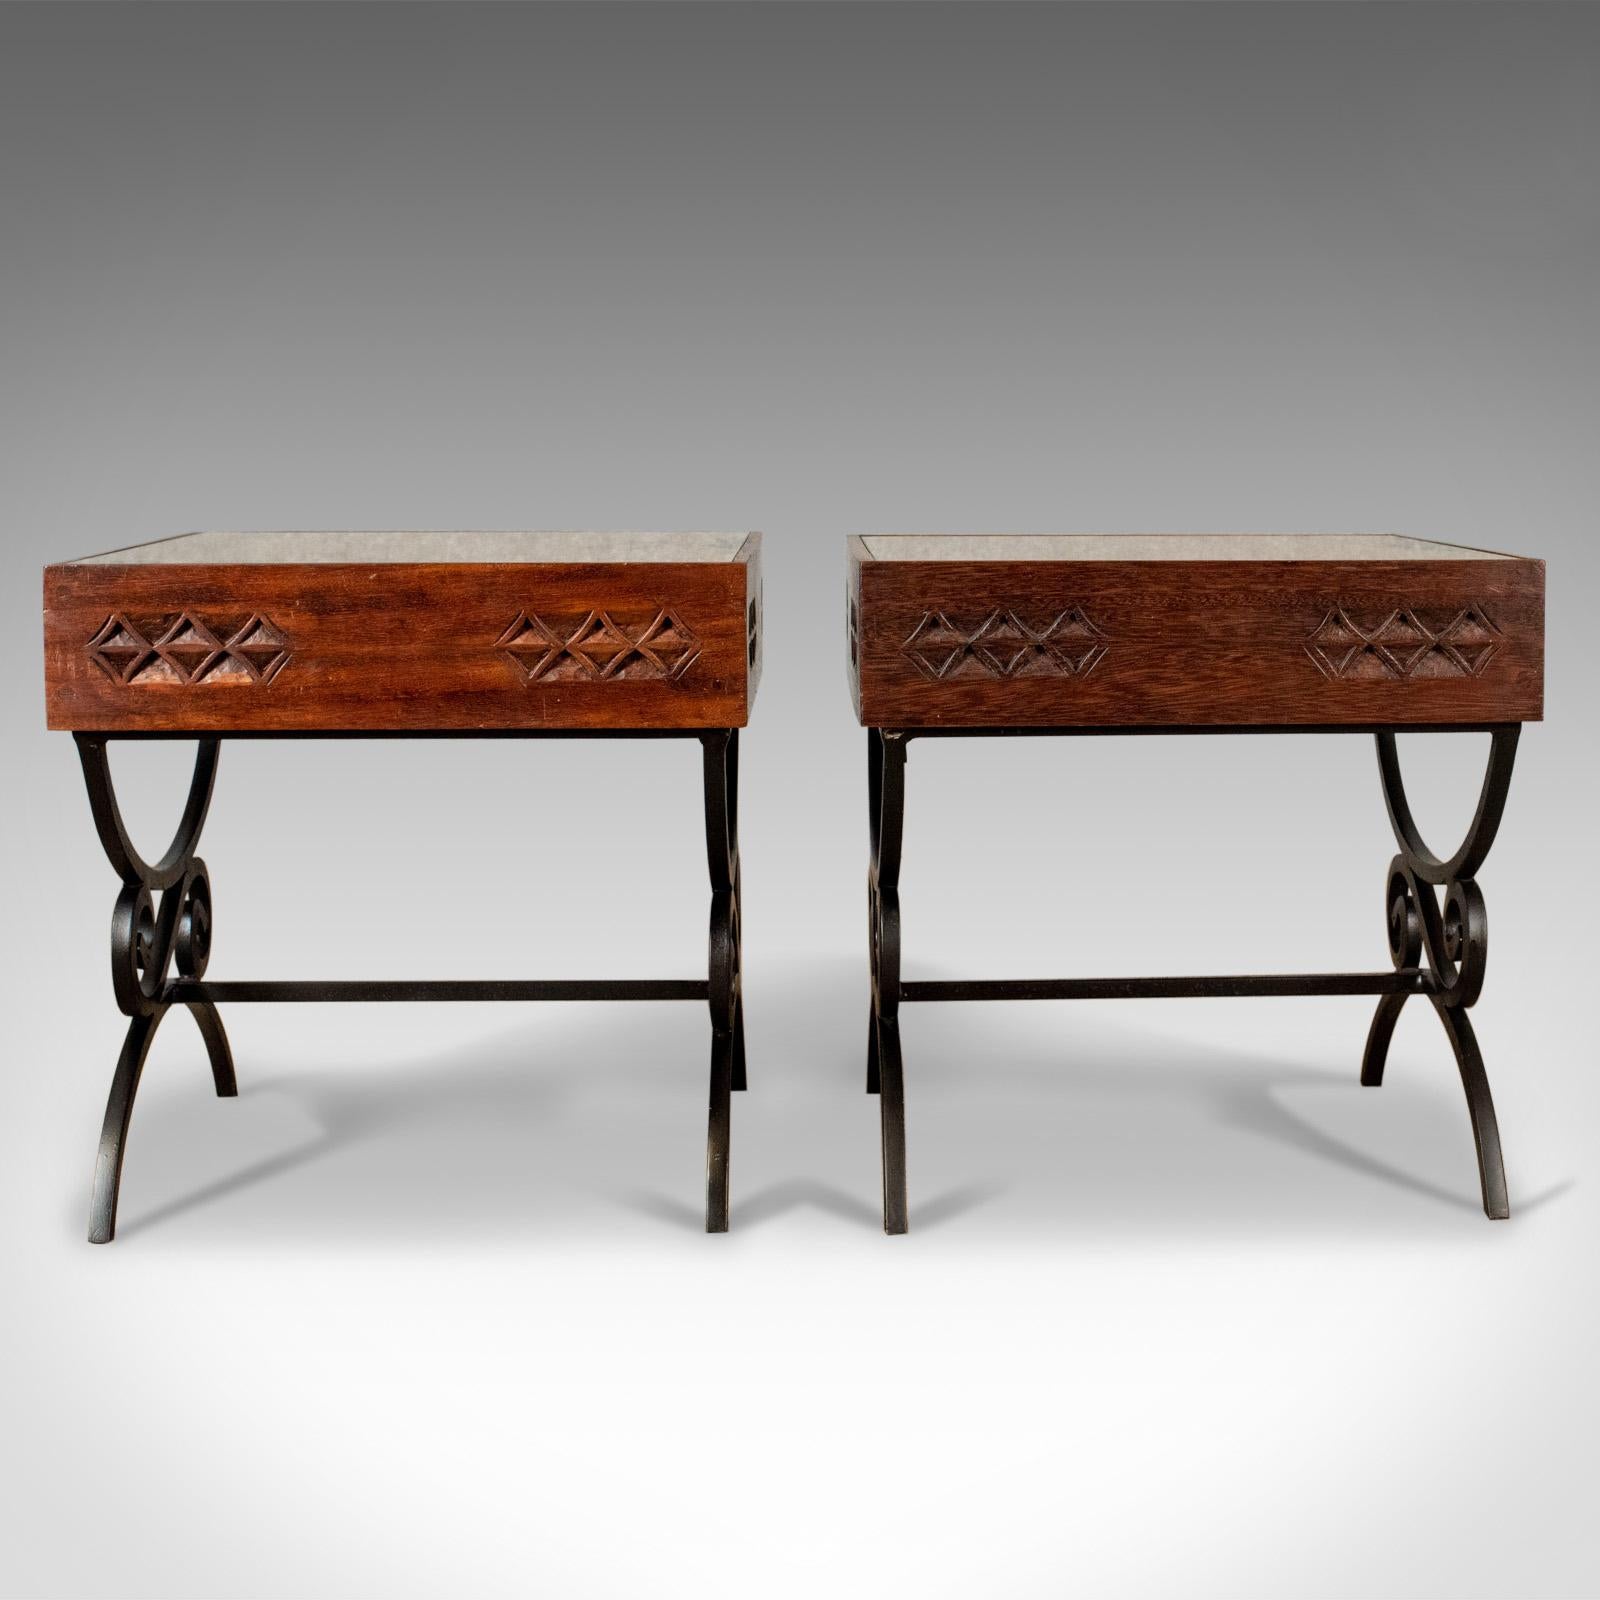 This is a pair of vintage Asian side tables, heavy, carved teak, coffee tables with glass tops raised on wrought iron legs dating to the late 20th century.

Attractive carved geometric panels with iron fixings
Inset to a deep frame decorated with